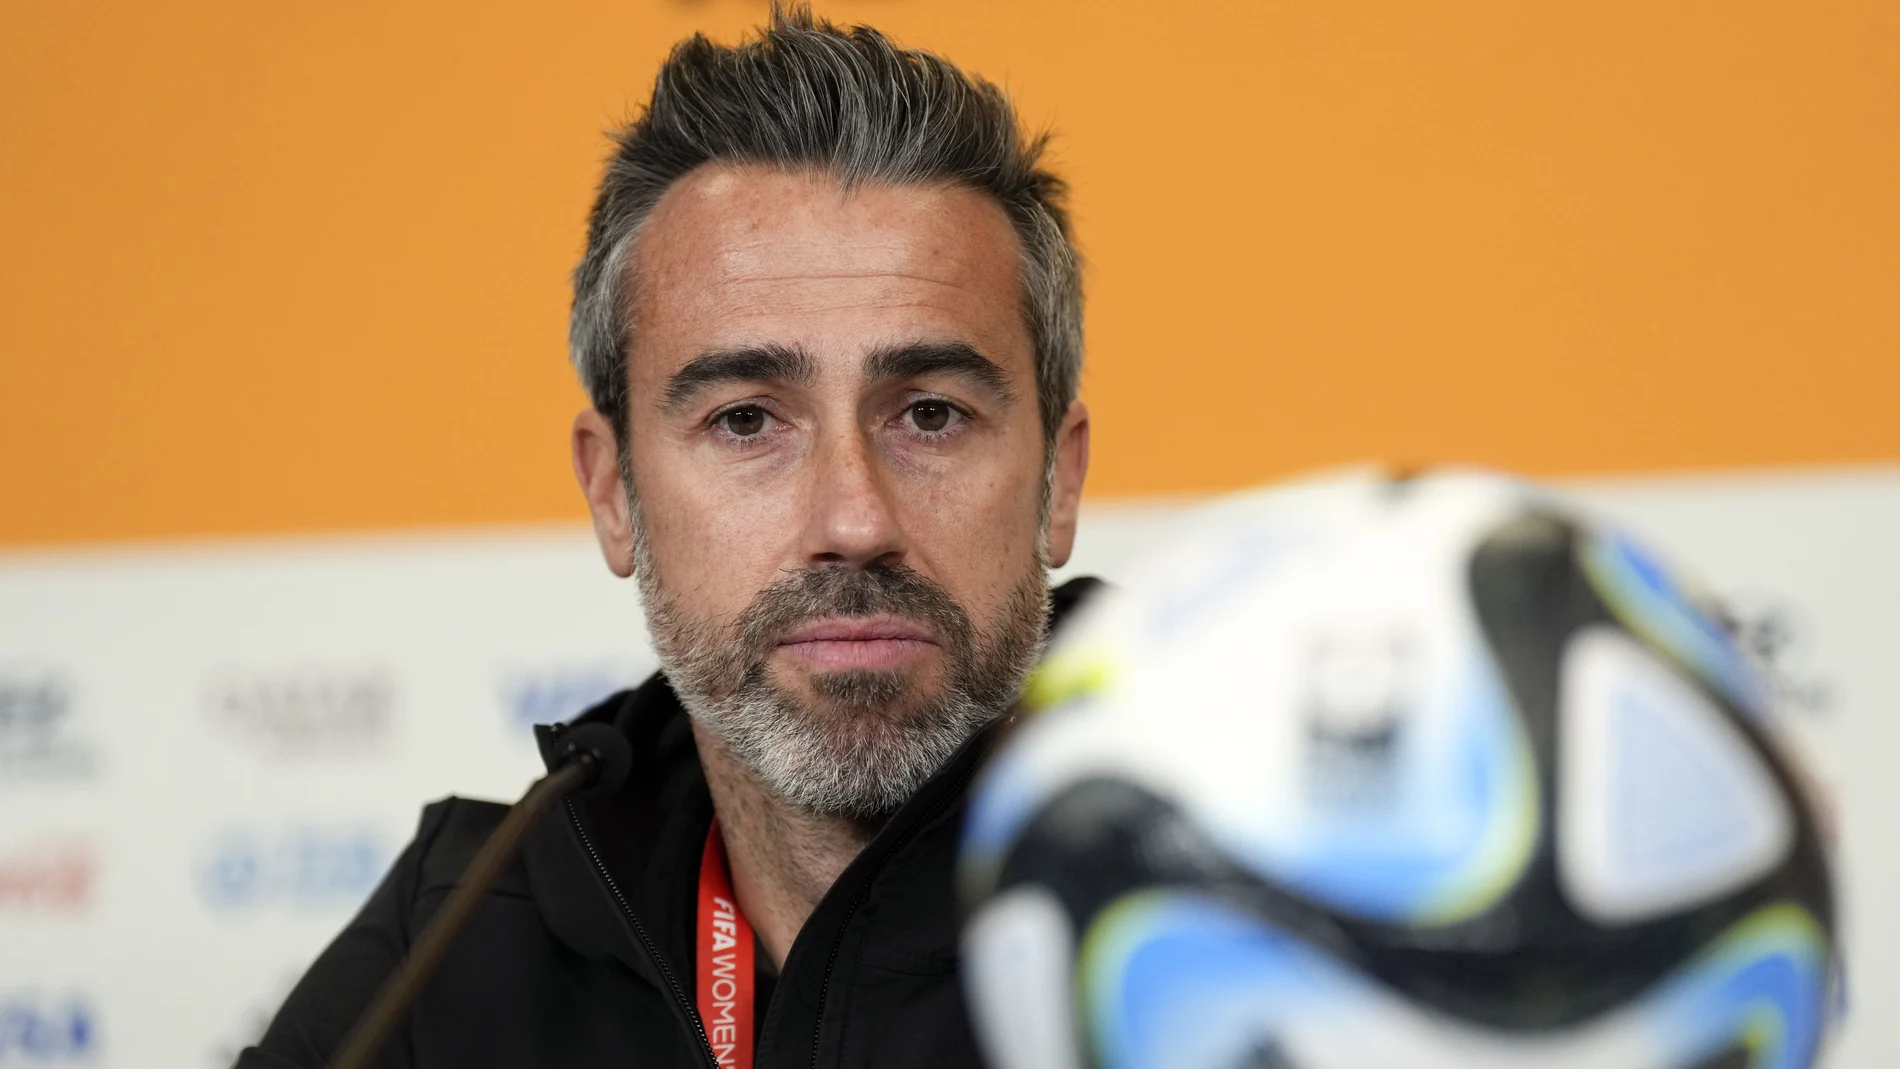 Spain's head coach Jorge Vilda attends a press conference ahead of the Women's World Cup quarterfinal soccer match between Spain and Netherlands in Wellington, New Zealand.